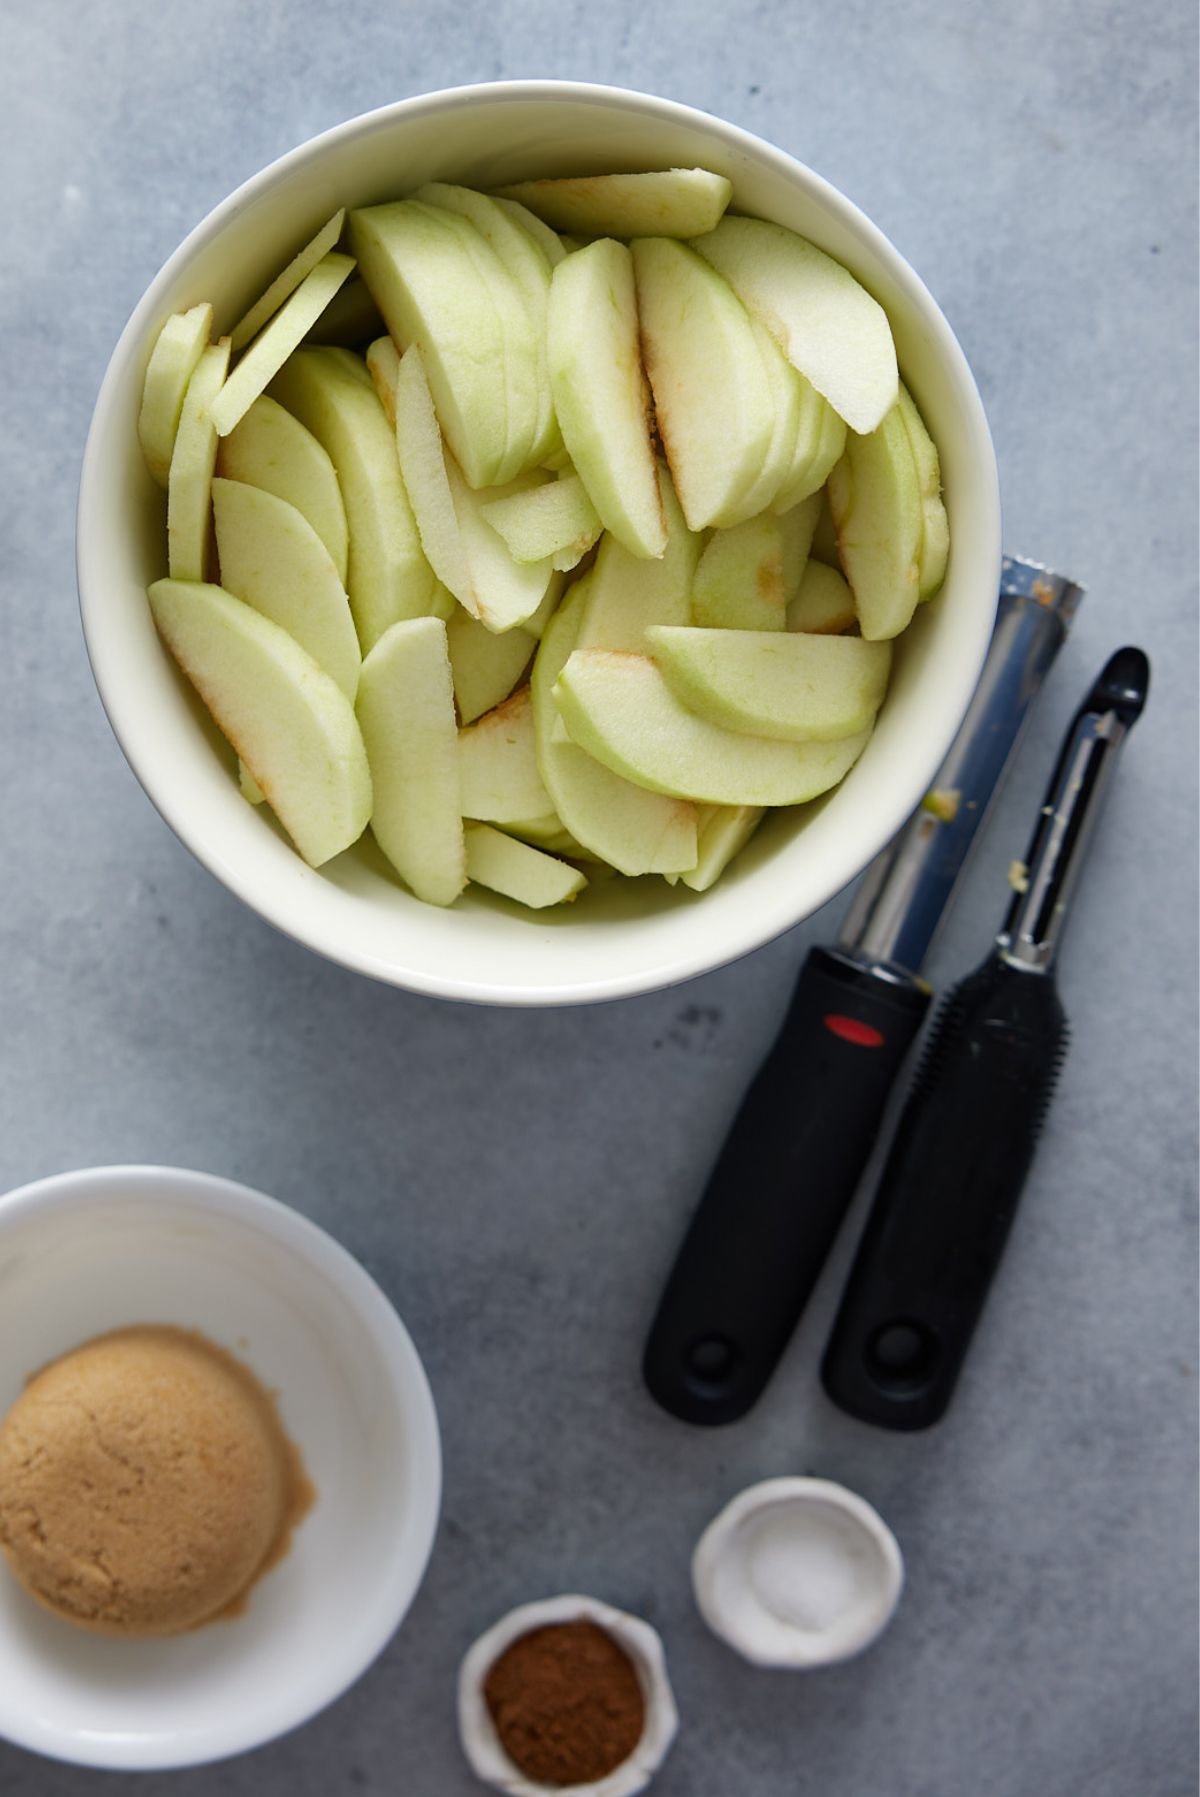 ingredients for fried apples, included cut apples, brown sugar, apple pie spice, and salt